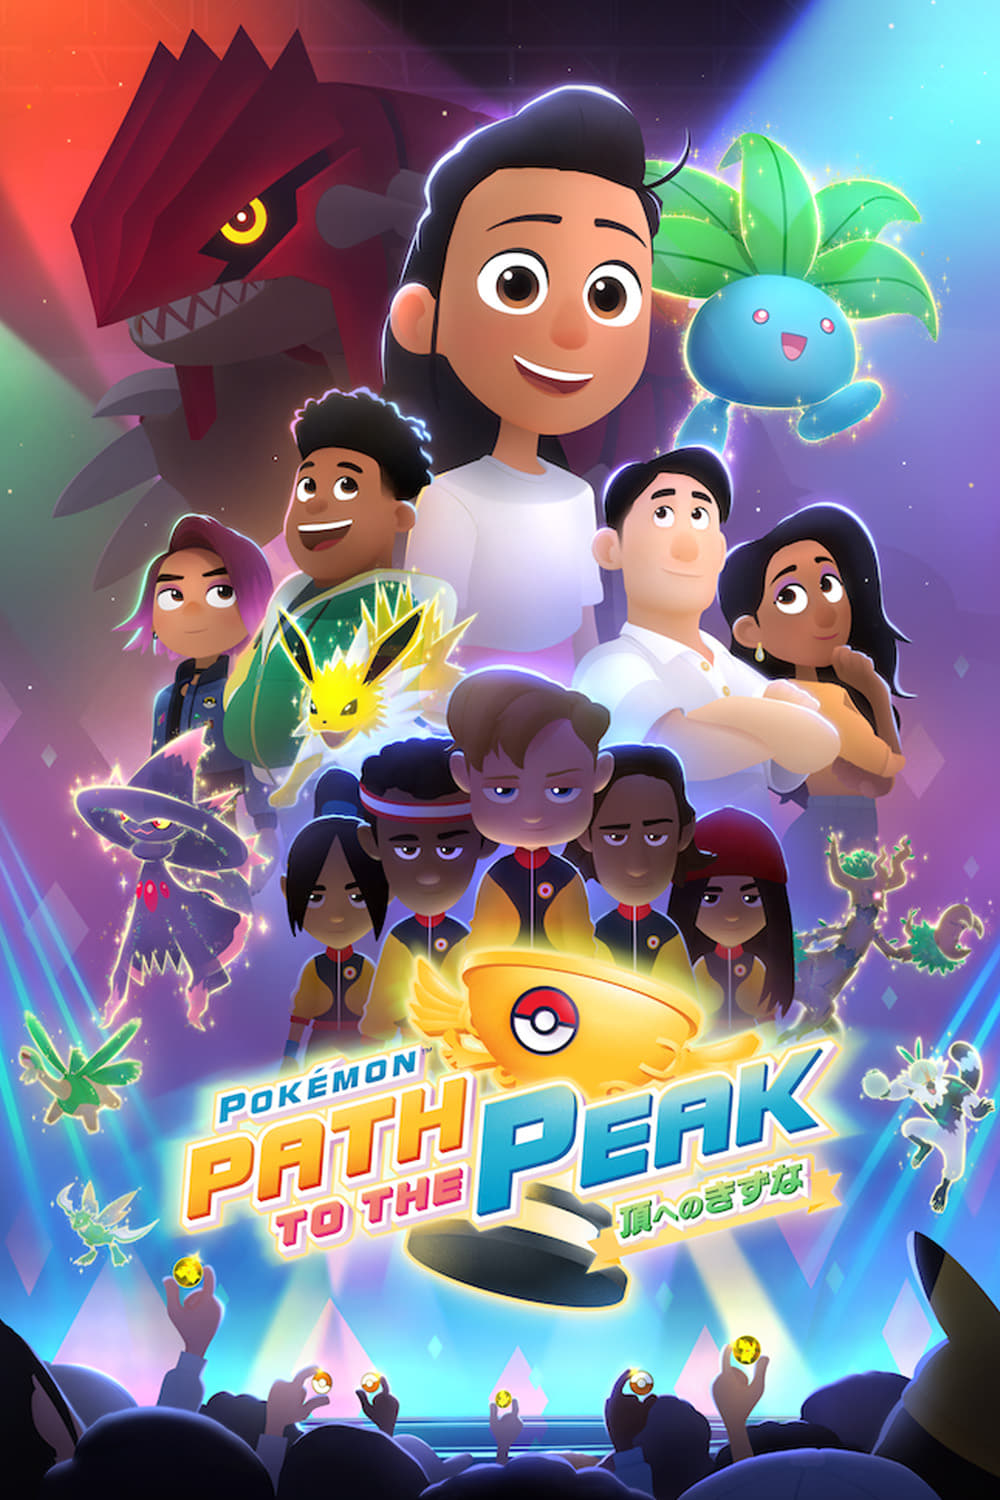 Pokémon: Path to the Peak TV Shows About Game